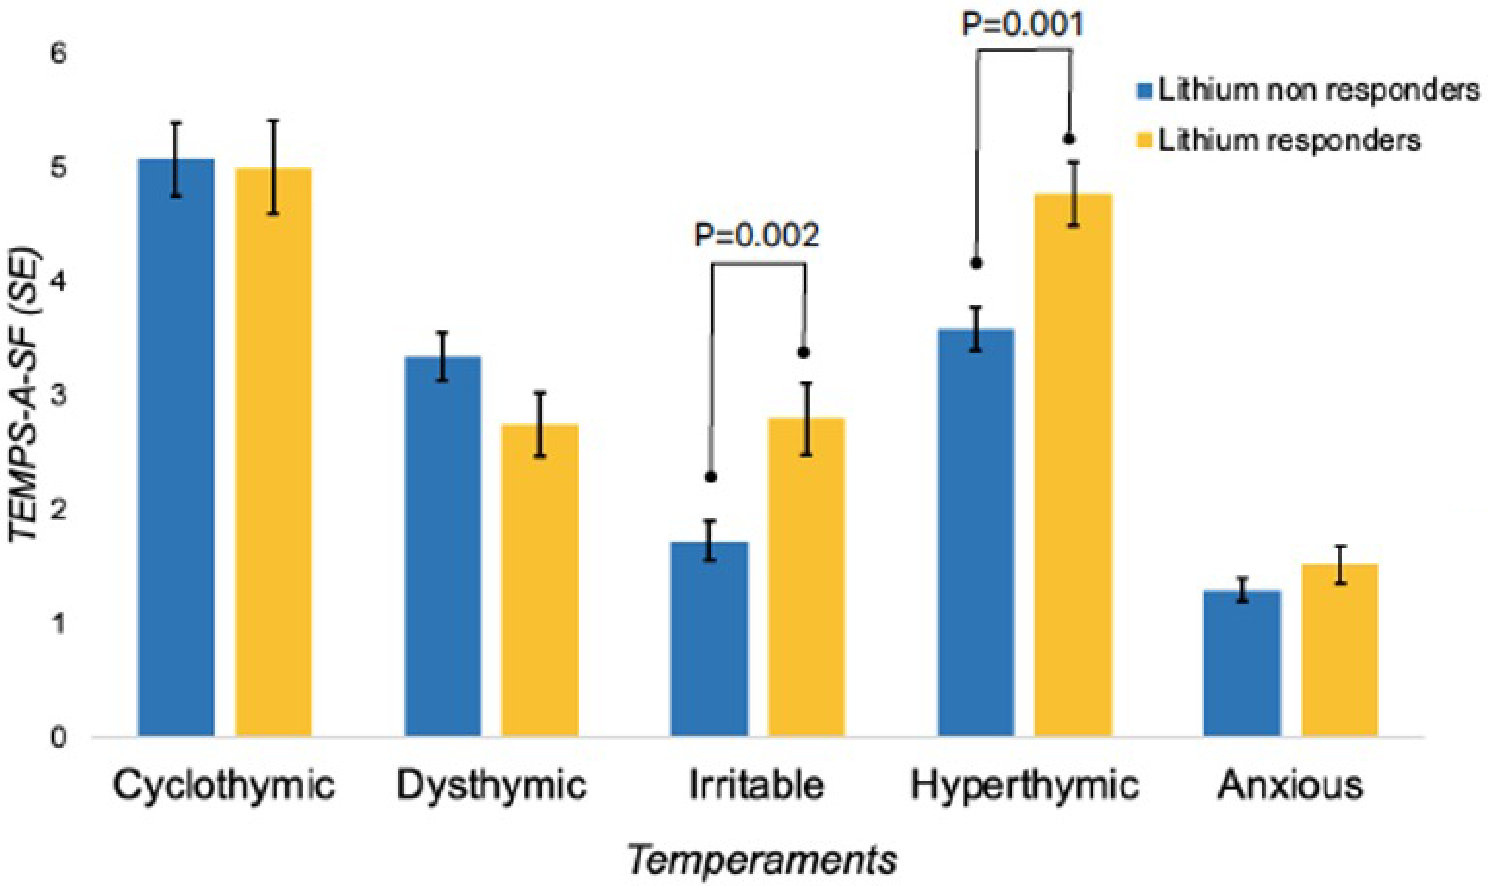 Type of cycle, temperament and childhood trauma are associated with lithium response in patients with bipolar disorders